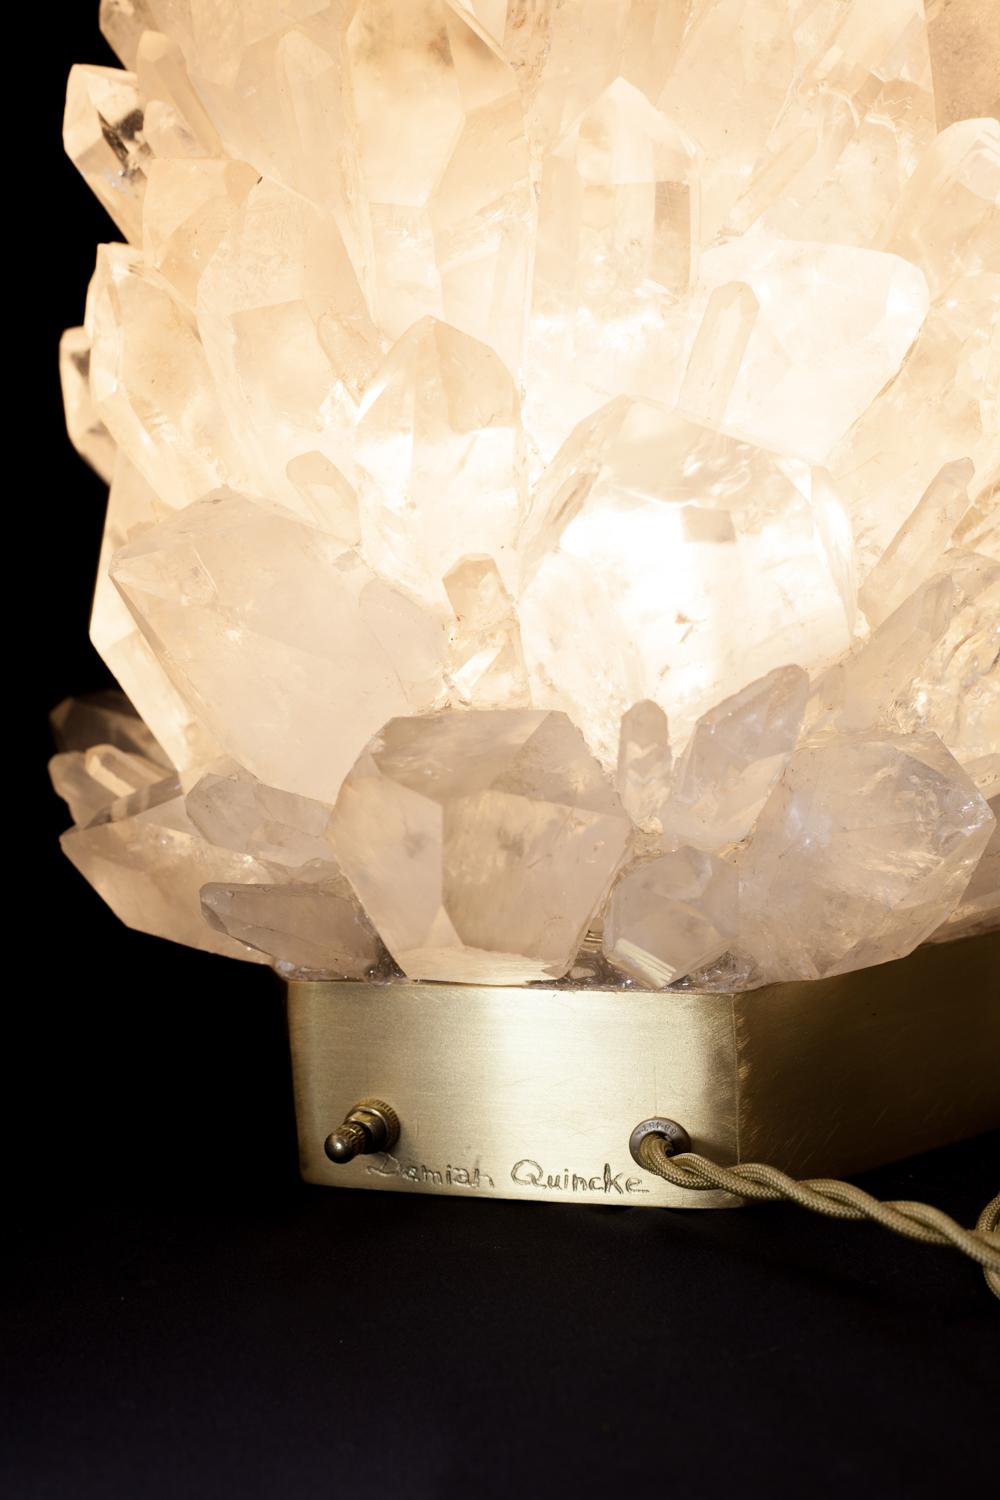 Pair of natural crystal table lamps - Signed by Demian Quincke
Natural crystal table lamps assembled and sculpted on casted brass base
Dimensions: 75 x 33 x 26 cm
25 kg each piece
Double silk shade 43 cm diameter
Natural rock crystal assembled